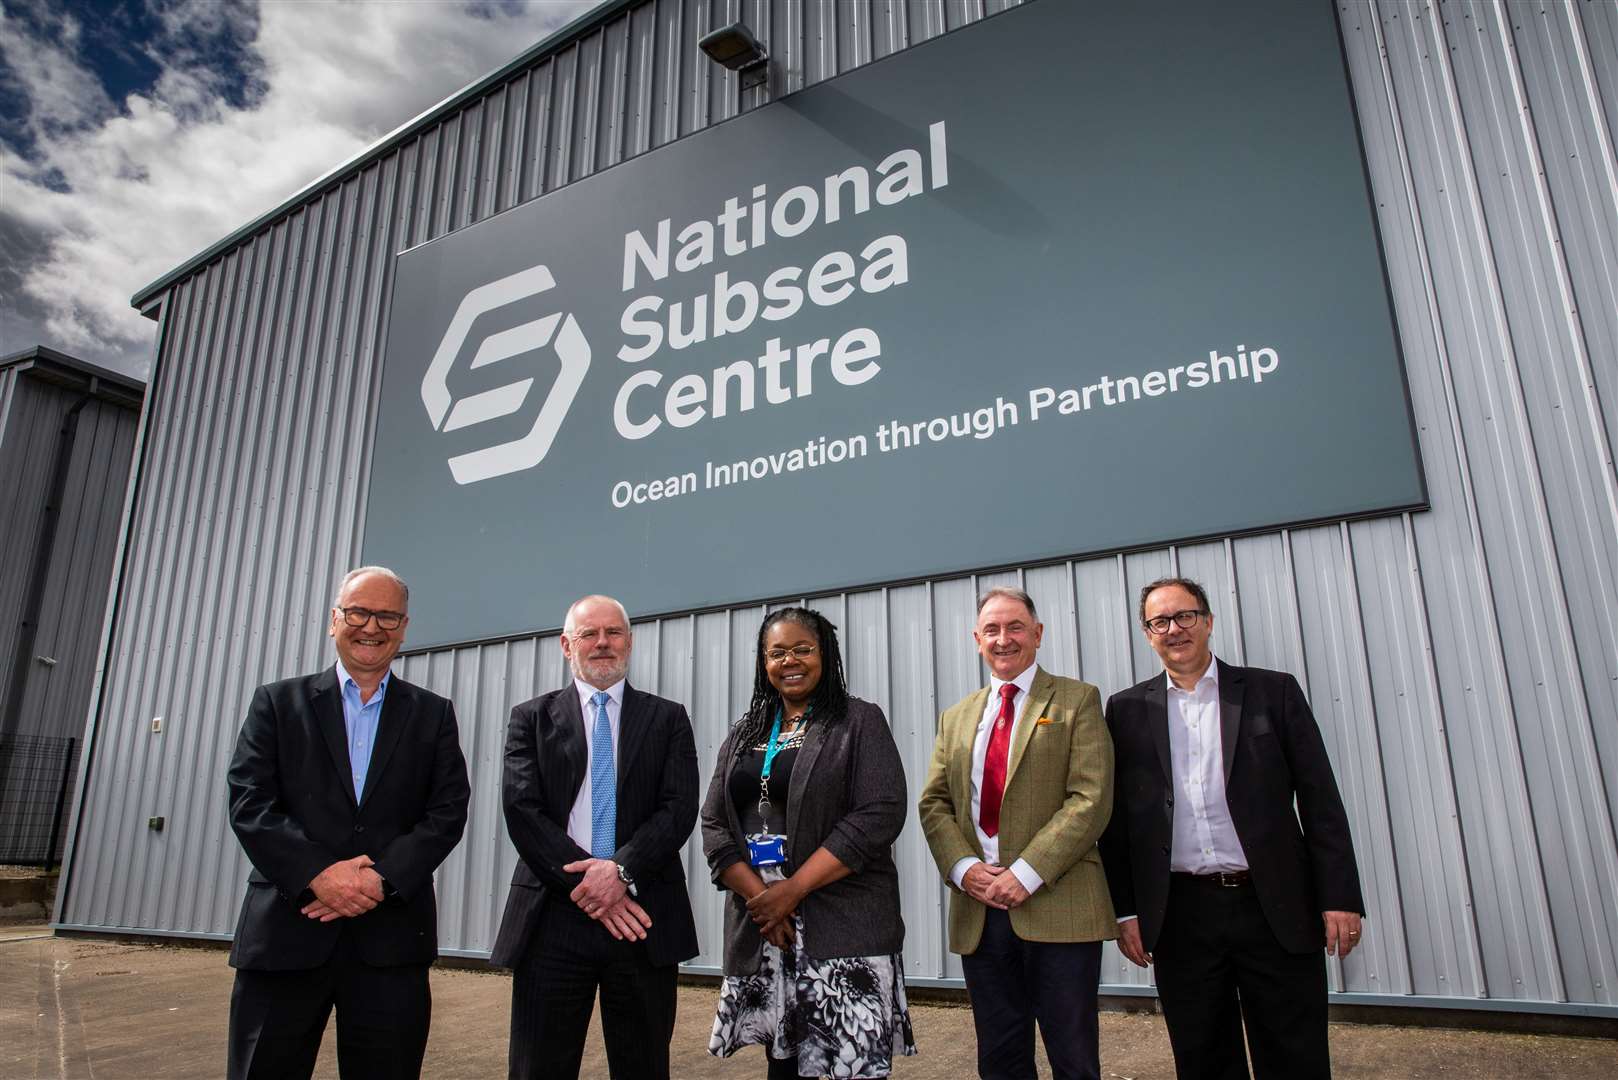 At the National Subsea Centre are (from left): Willie Reid, director of Strathclyde Offshore Energy Transition Programme; Professor Steve Olivier, principal of Robert Gordon University; Myrtle Dawes, solution centre director at Net Zero Technology Centre; Professor Sir Jim McDonald, principal of the University of Strathclyde; and Professor John McCall, director of the National Subsea Centre.